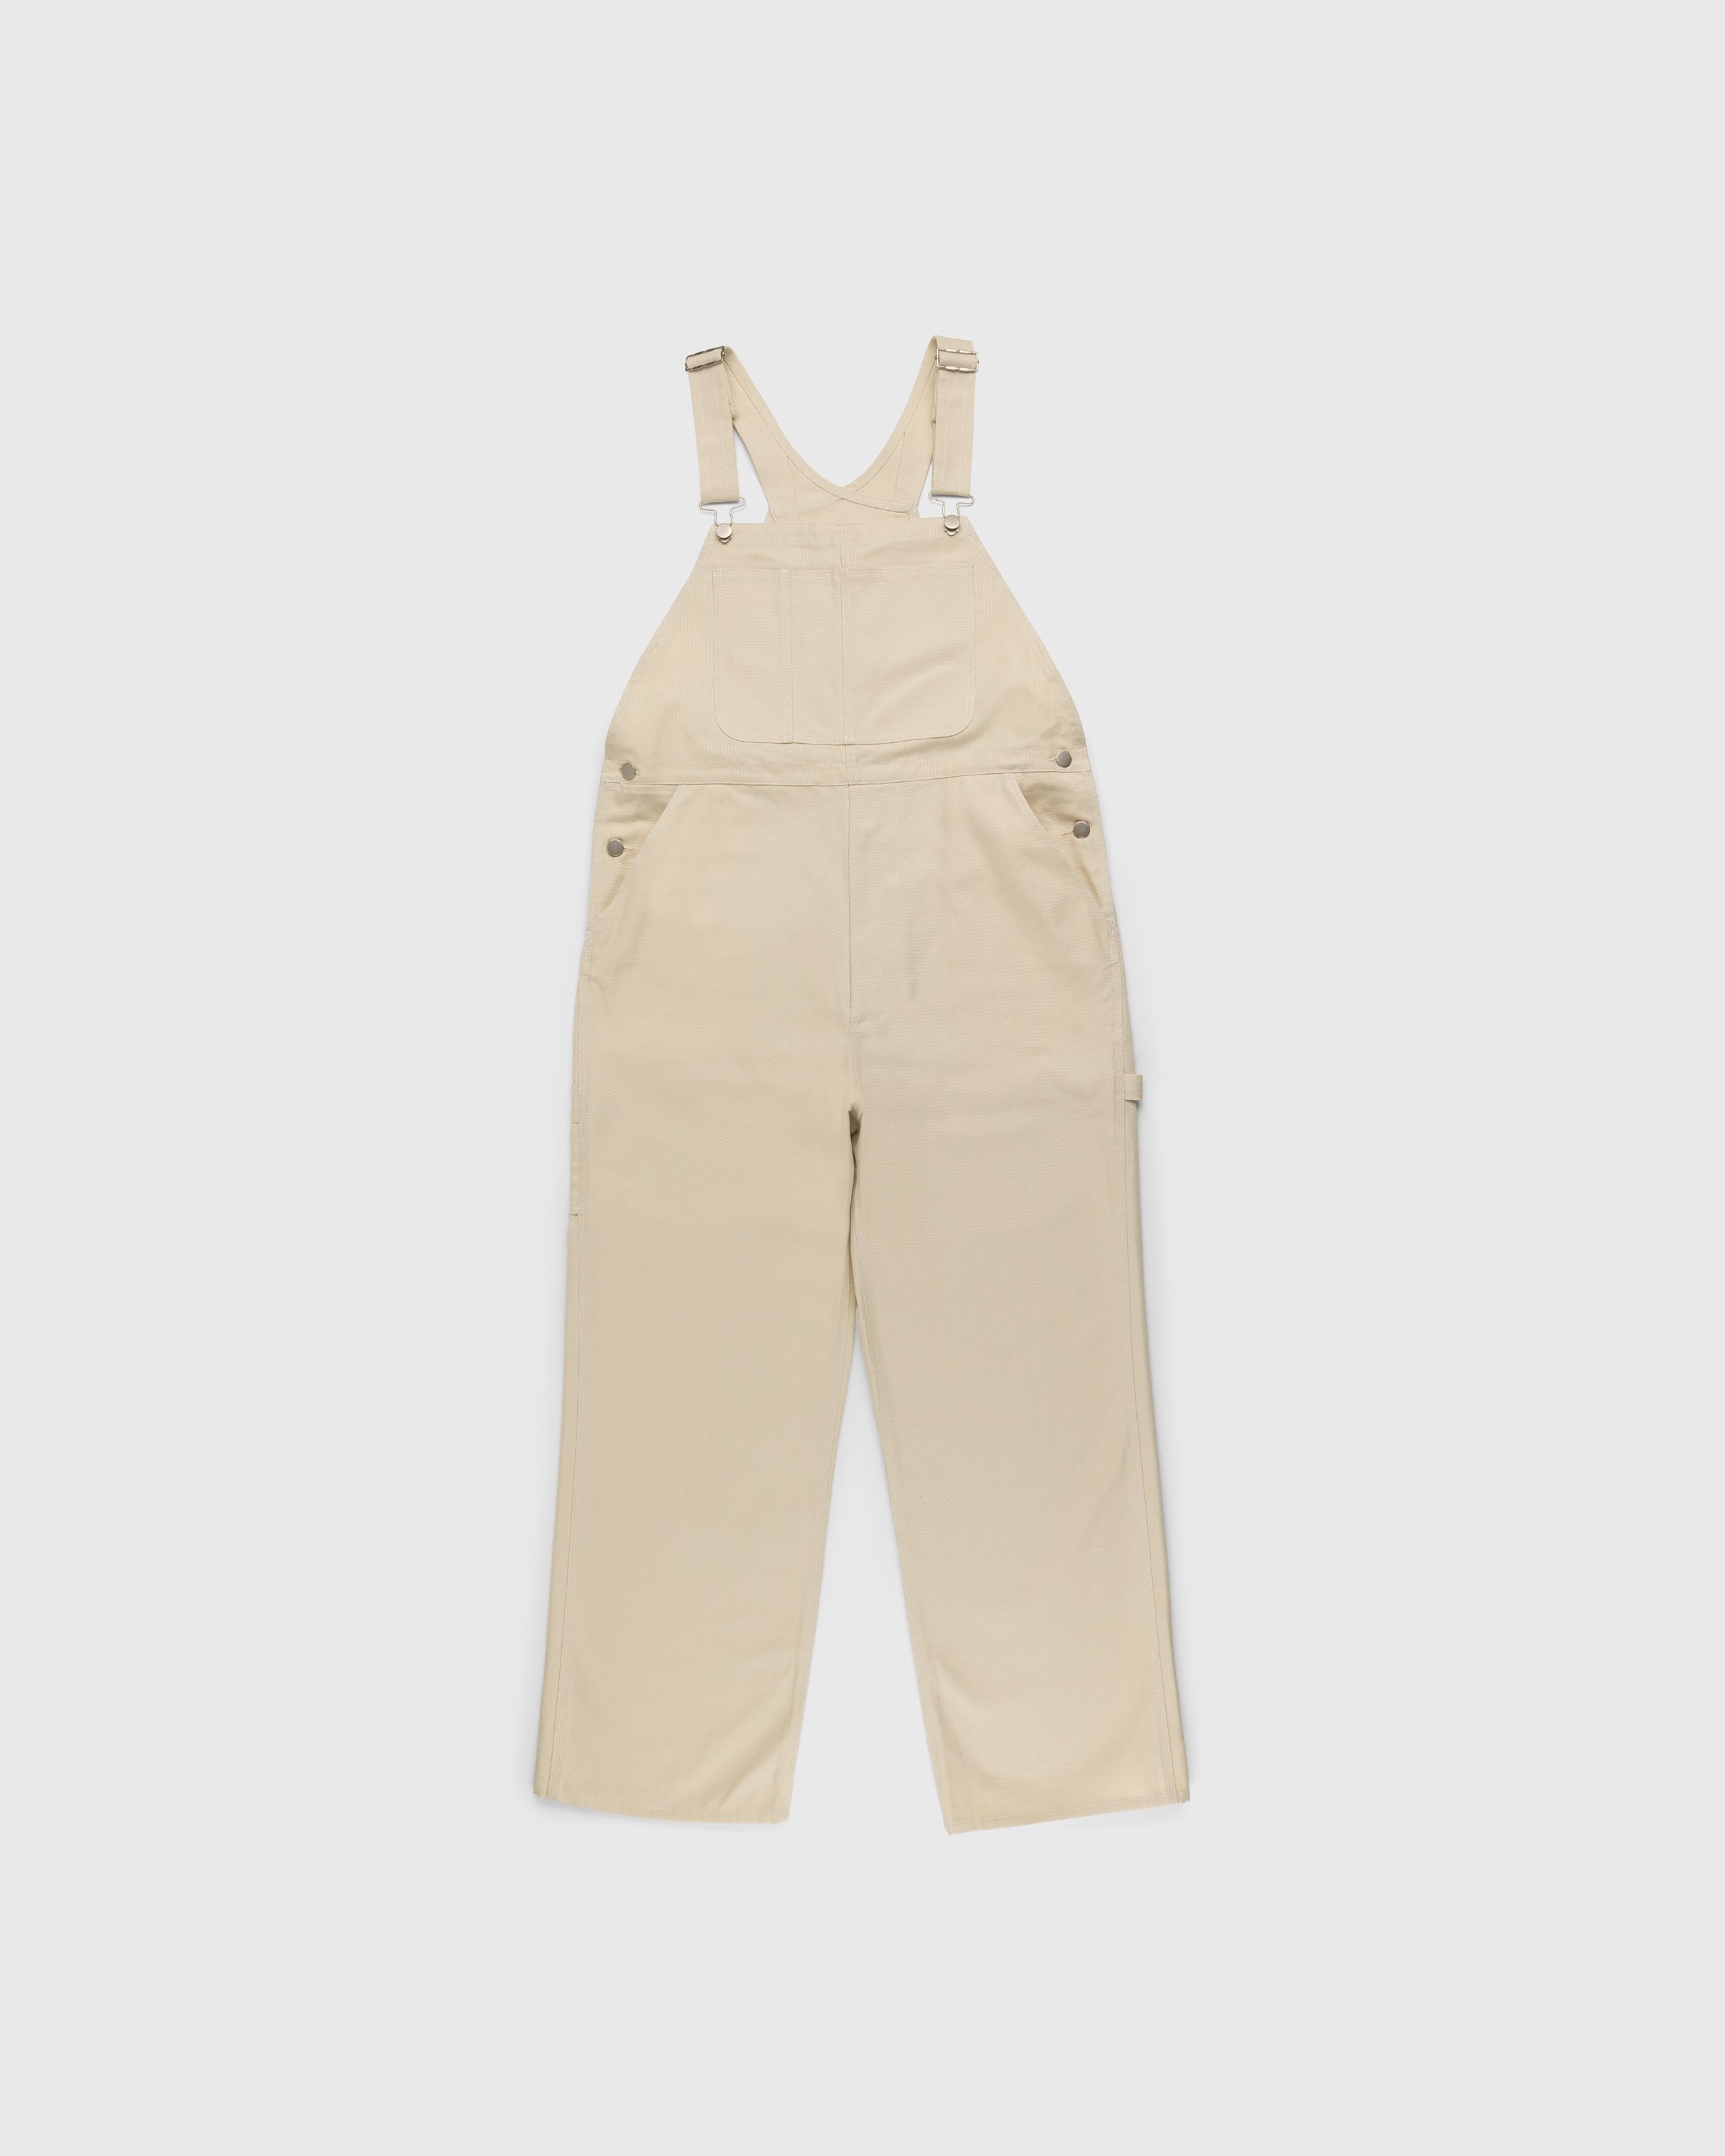 RUF x Highsnobiety – Cotton Overalls Natural - Trousers - Beige - Image 2